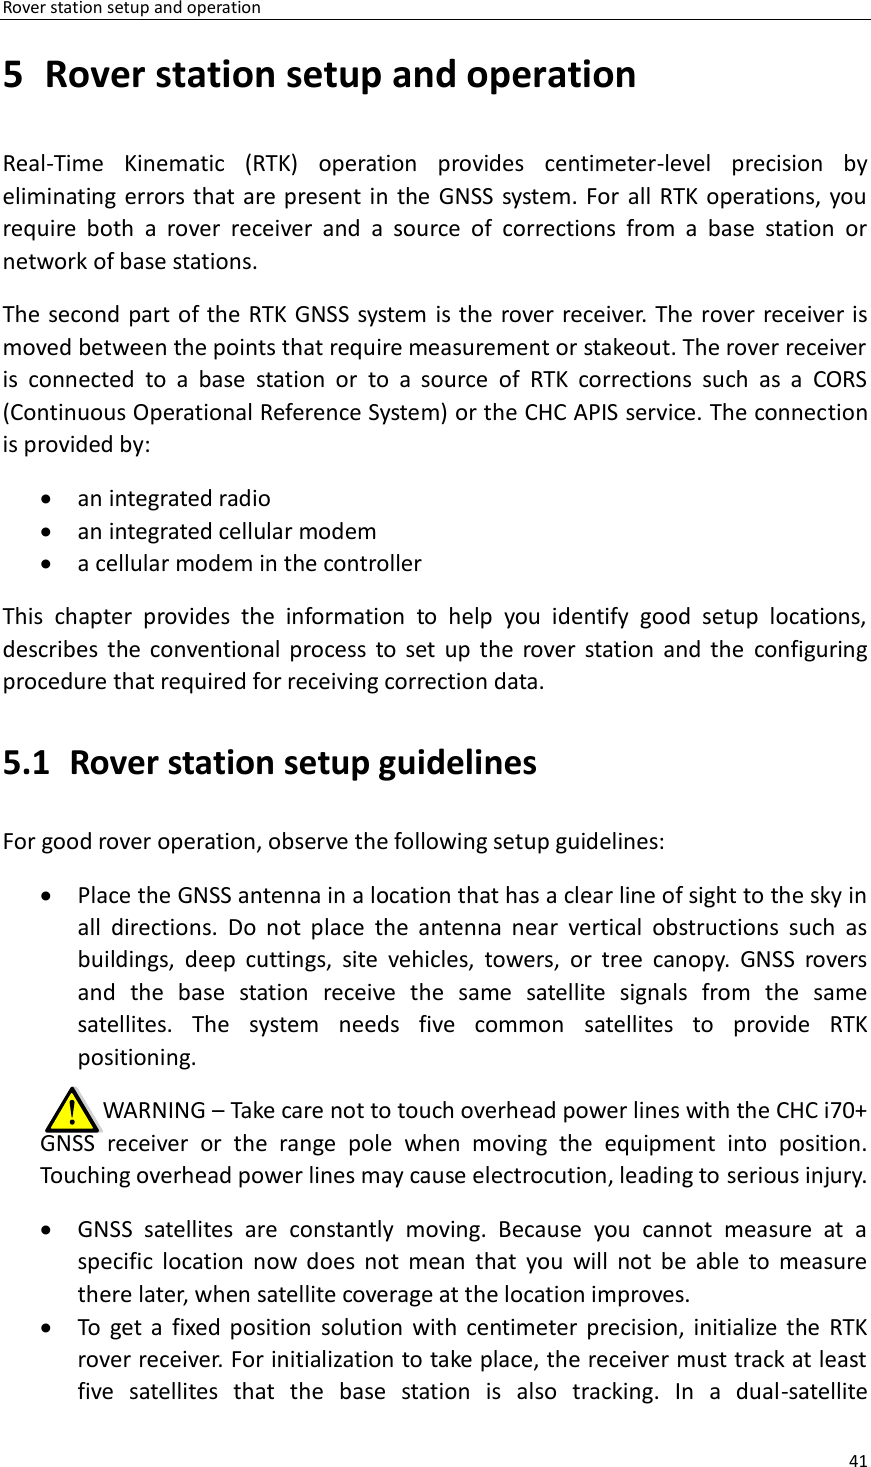 Page 41 of Huace Navigation Technology A01023 GNSS Receiver i70+ User Manual 